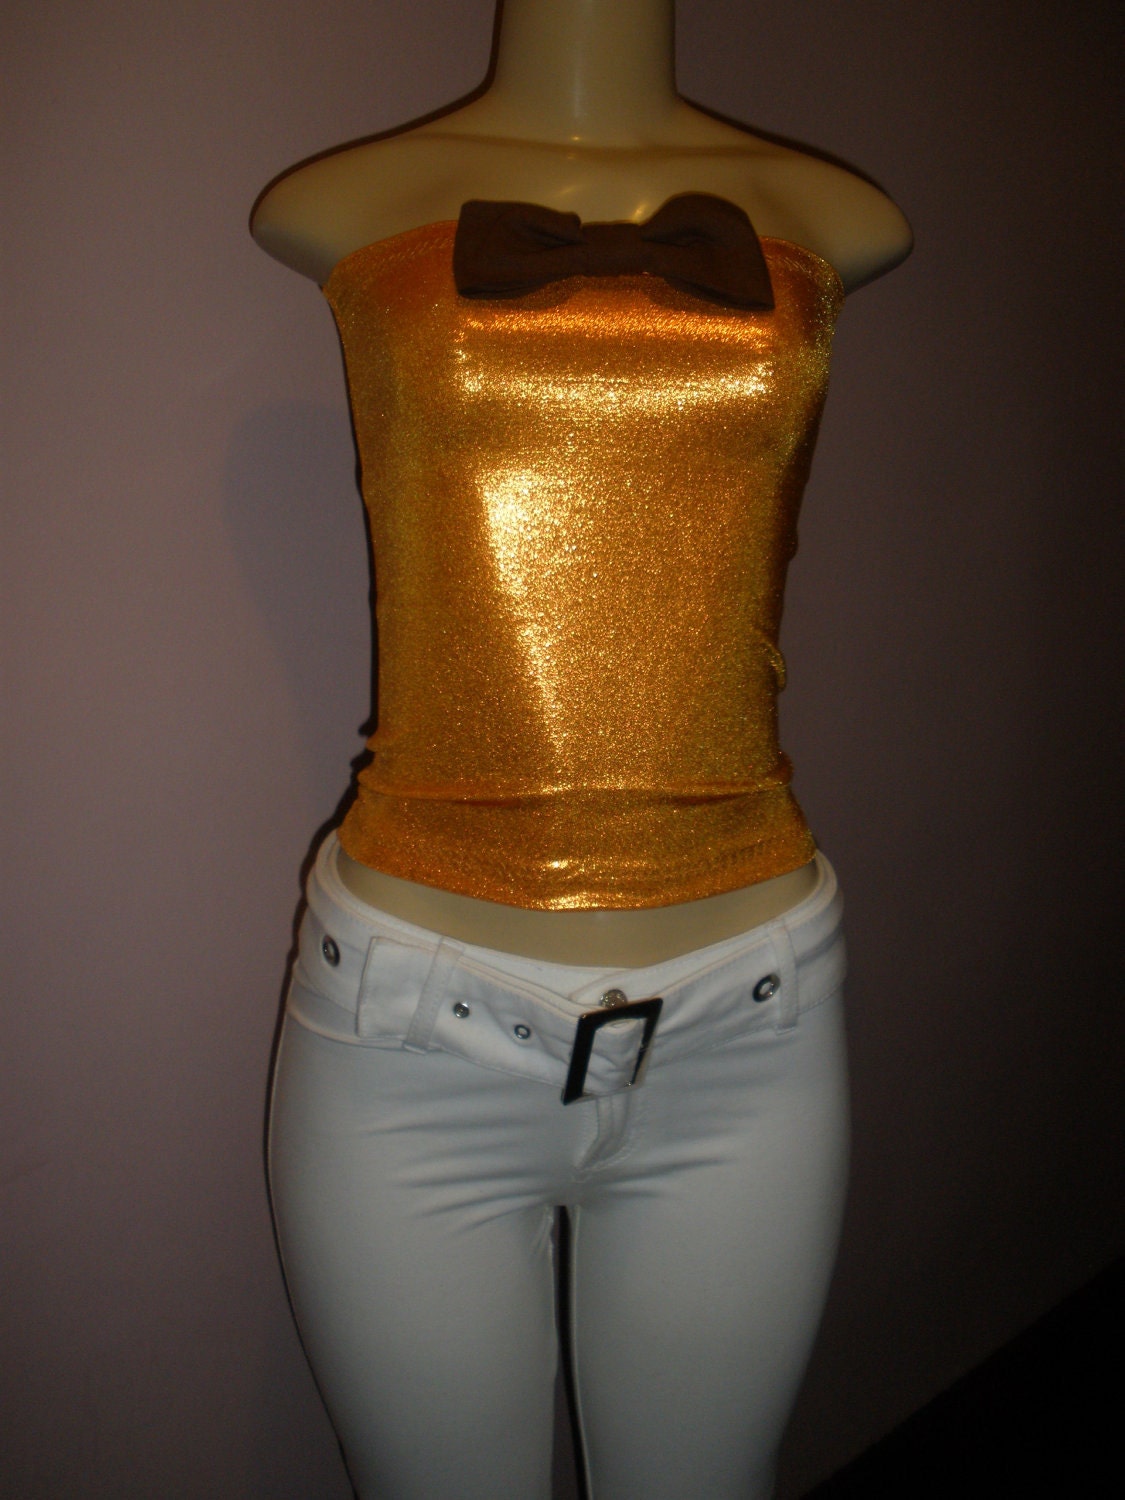 Adorable Golden Orange Handcrafted Halter Top with Cute Brown Bow on Front Fits Size: Small/Mediun/Large